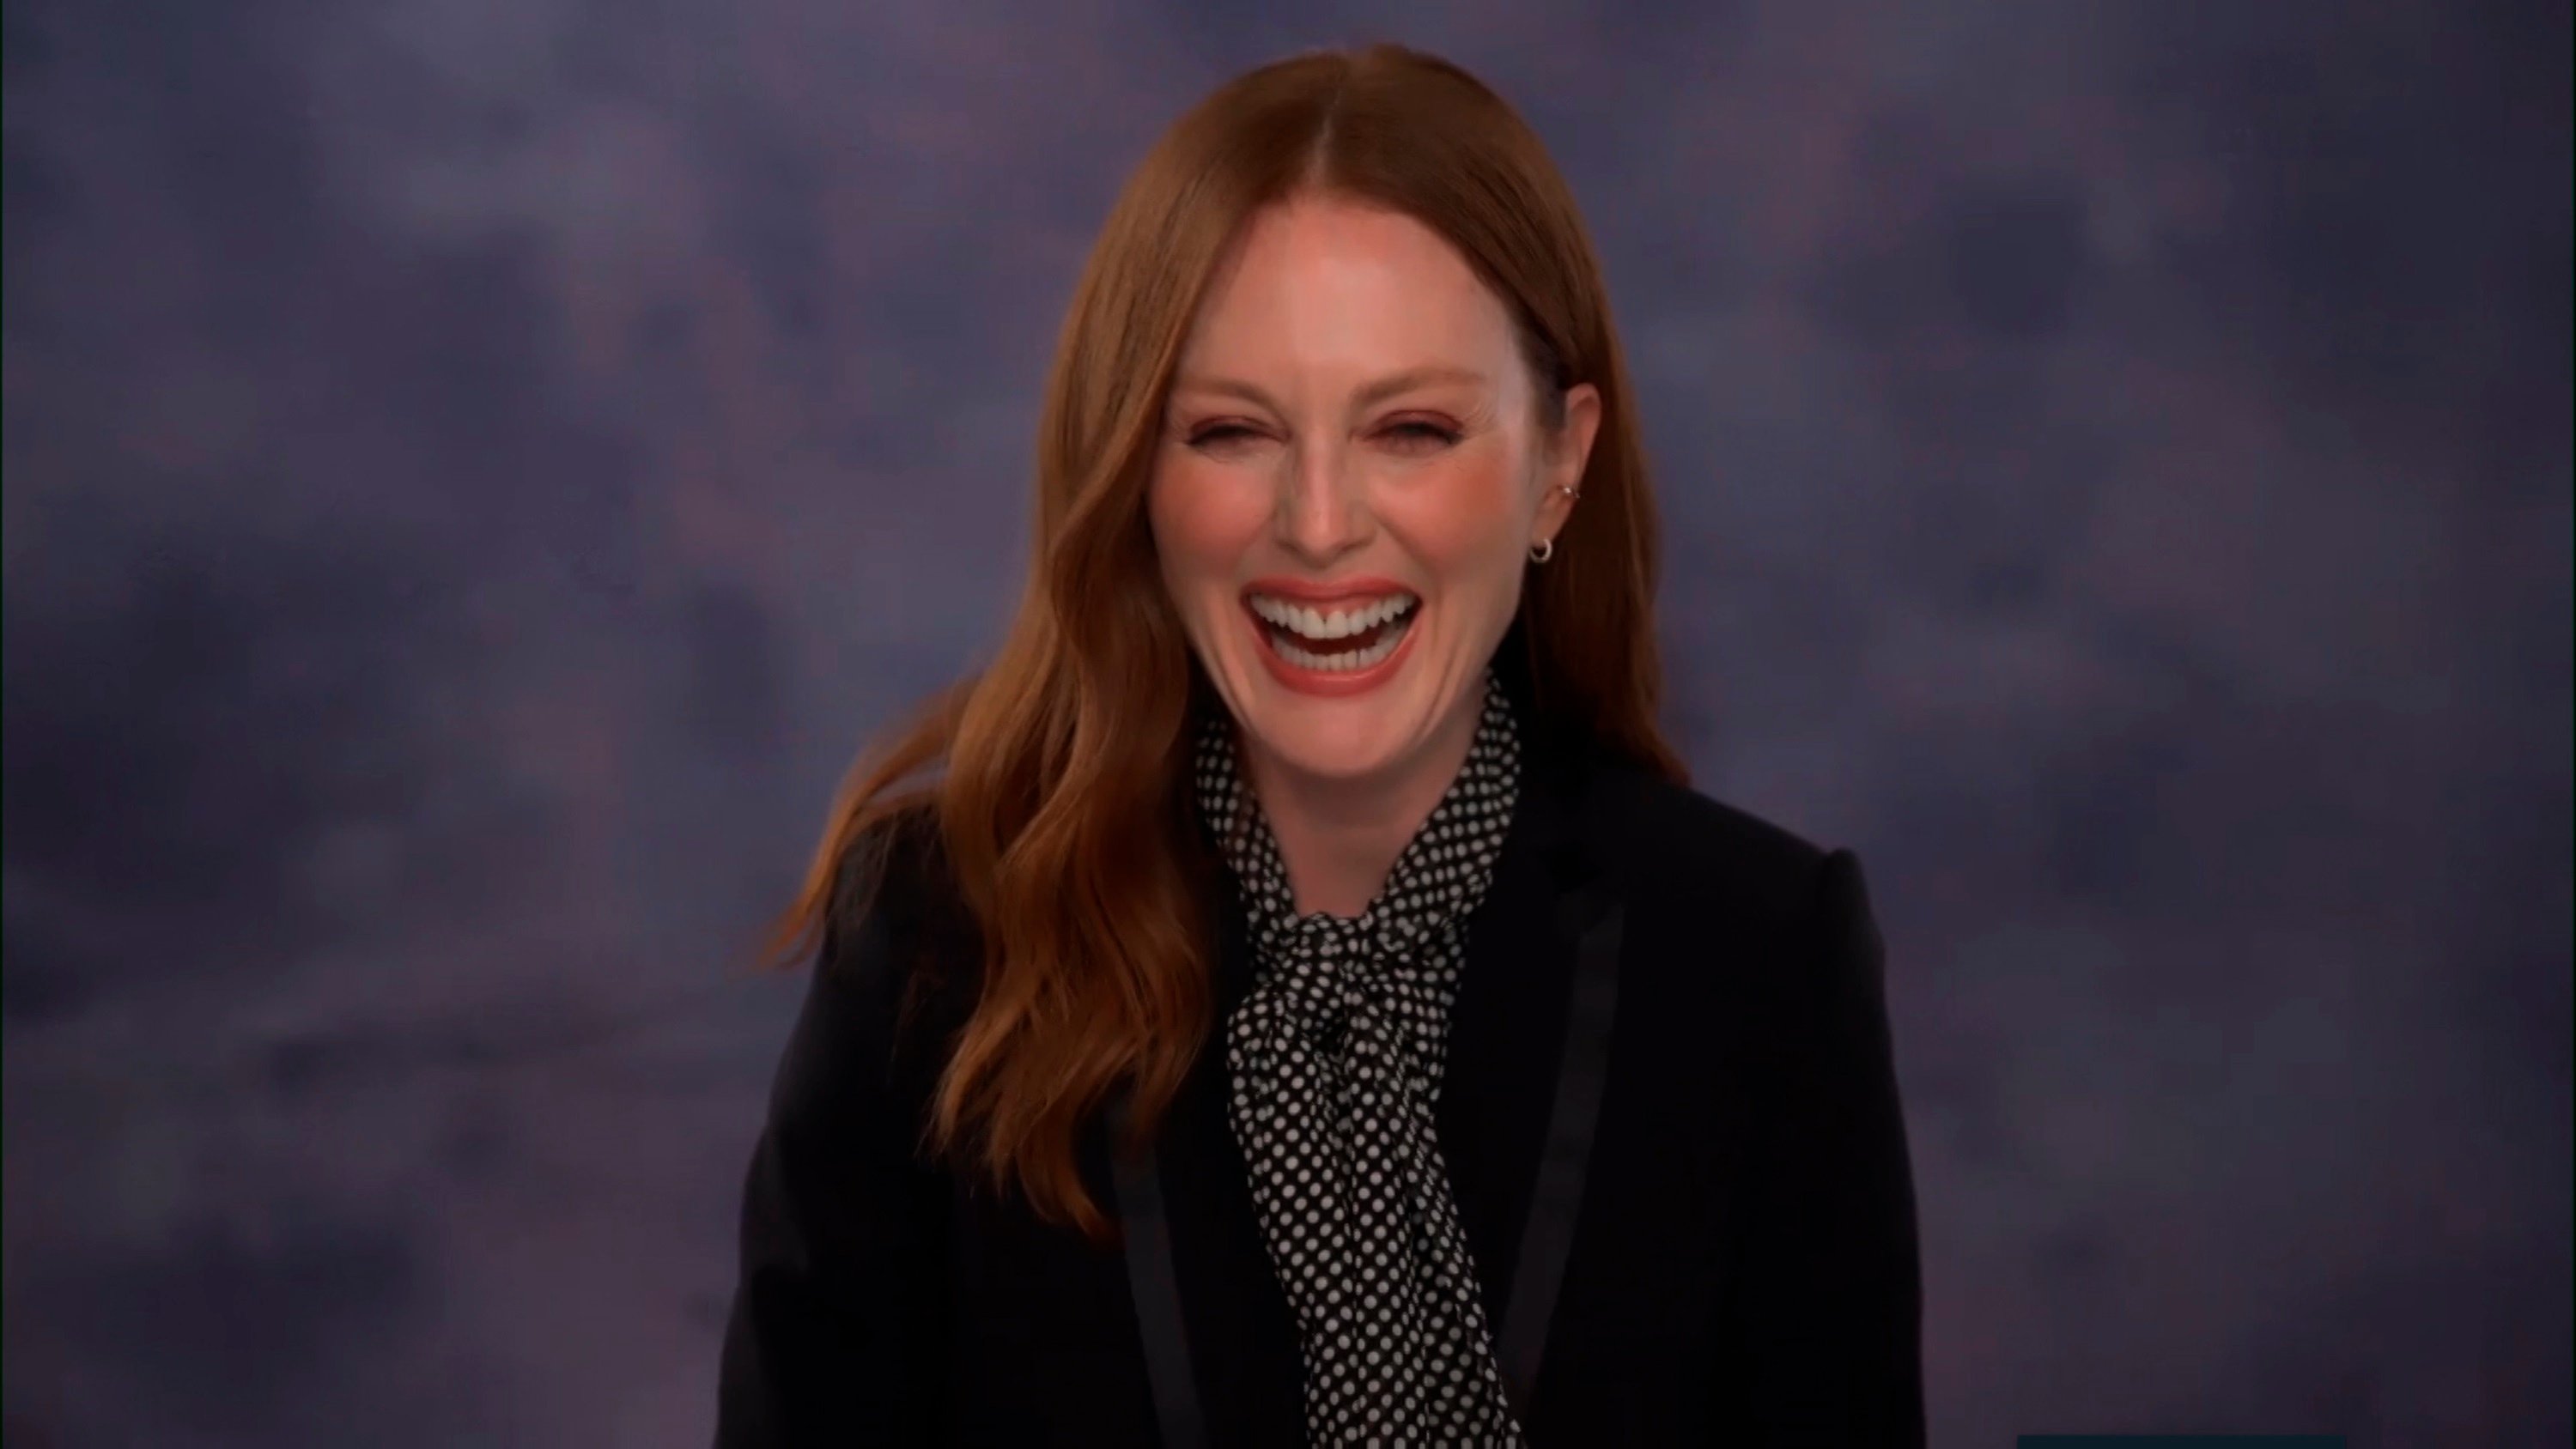 Julianne Moore visited the Tonight Show Starring Jimmy Fallon and discussed her Apple TV+ original series Lisey's Story